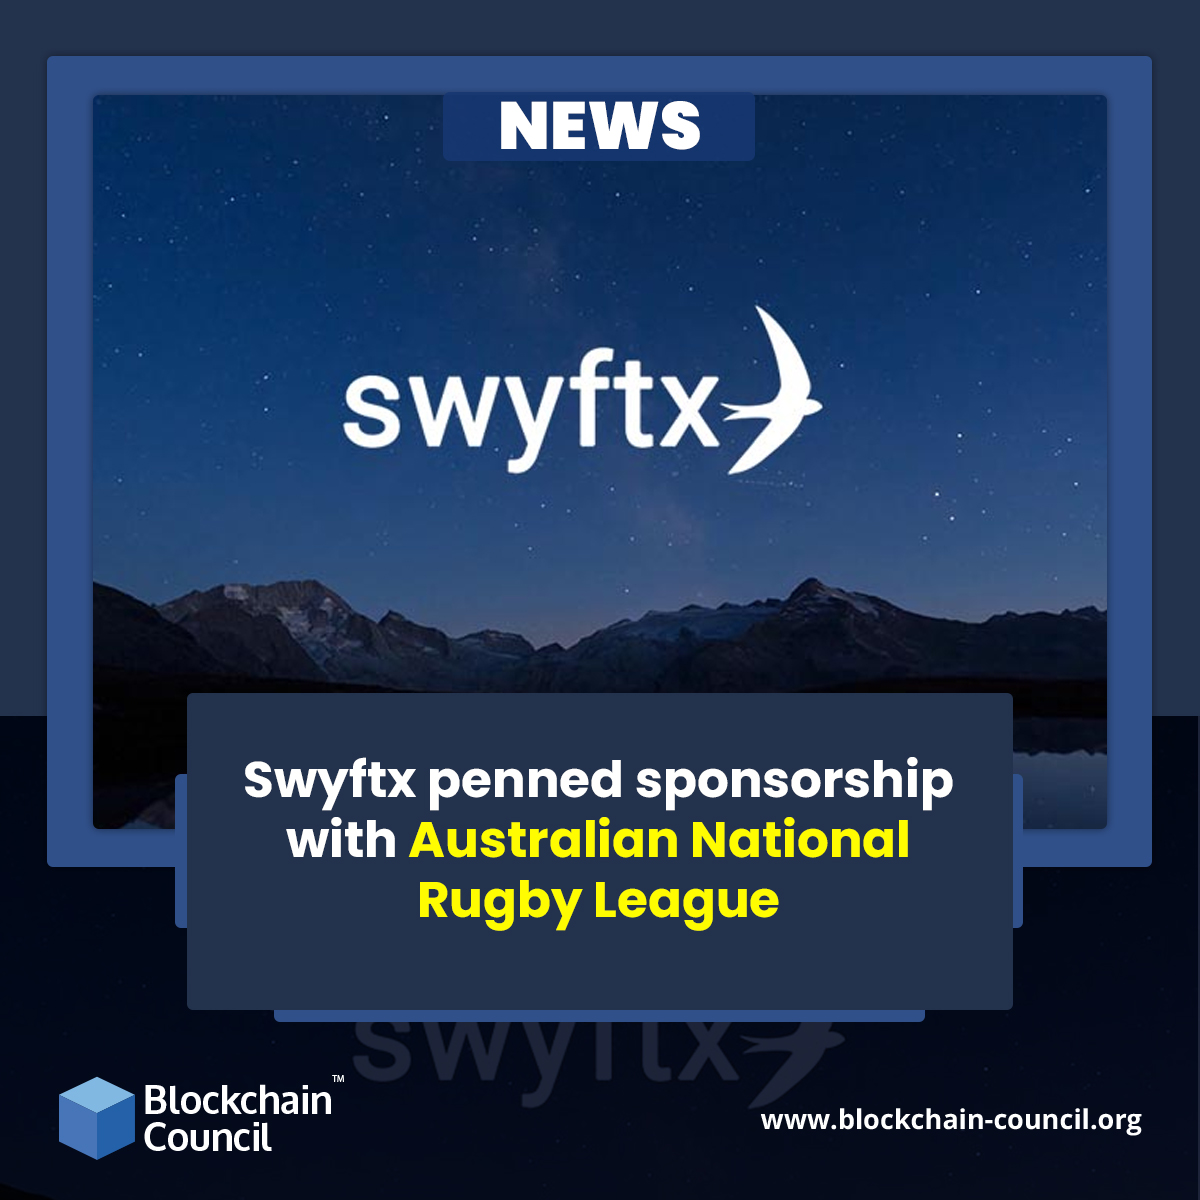 Swyftx penned sponsorship with Australian National Rugby League